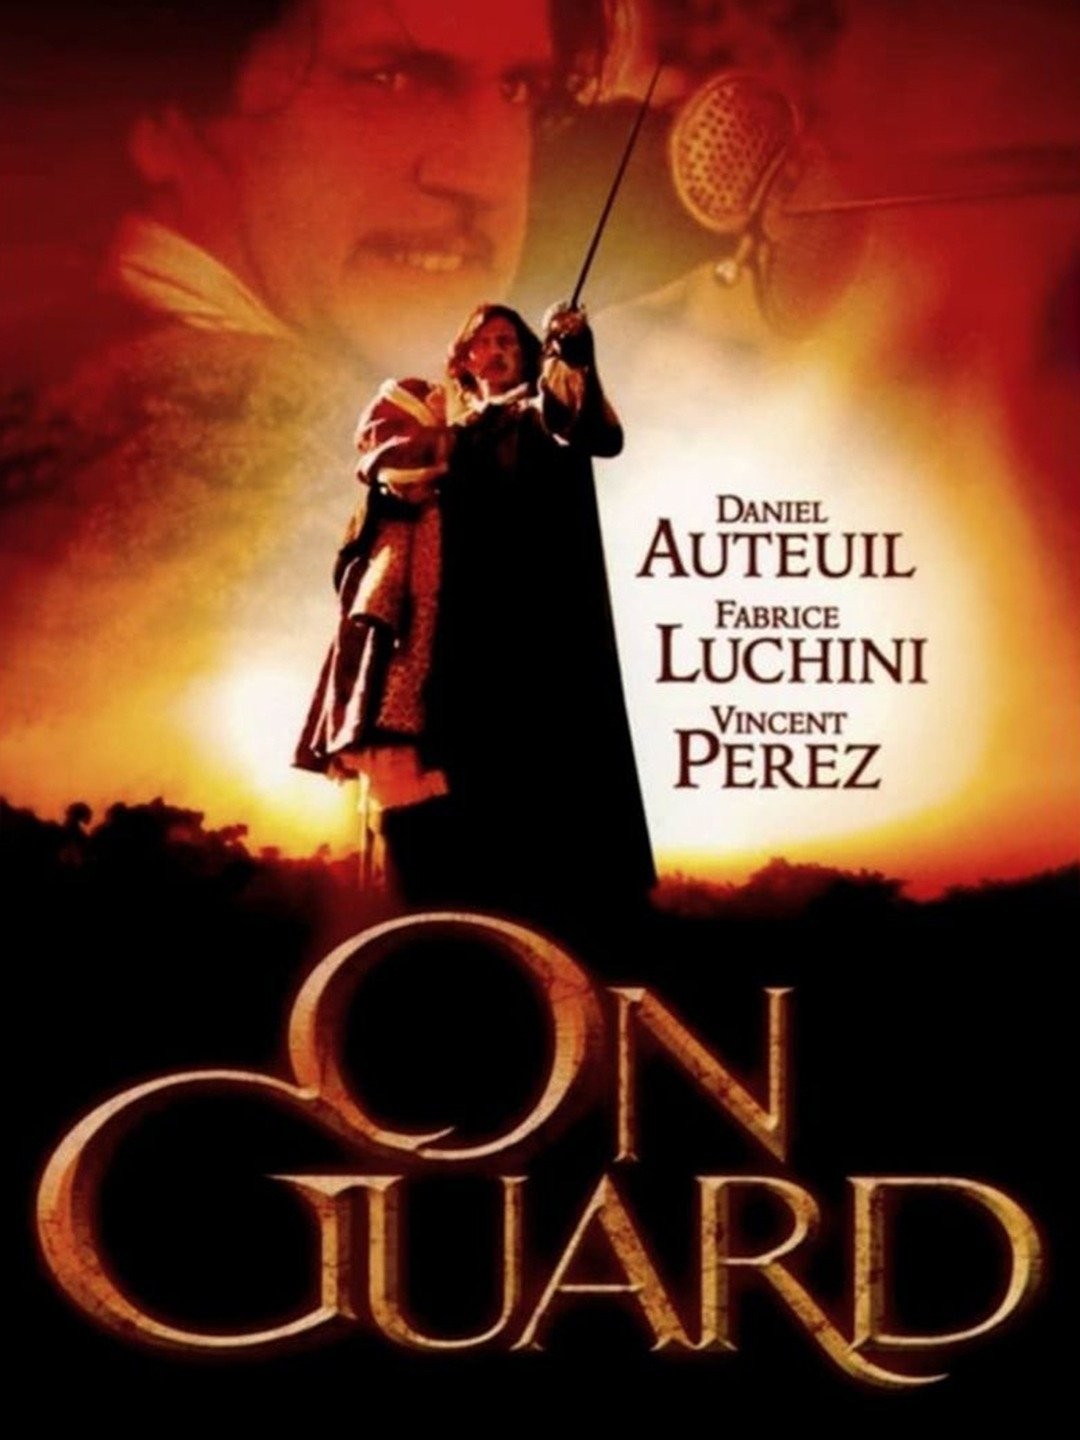 The Old Guard - Rotten Tomatoes